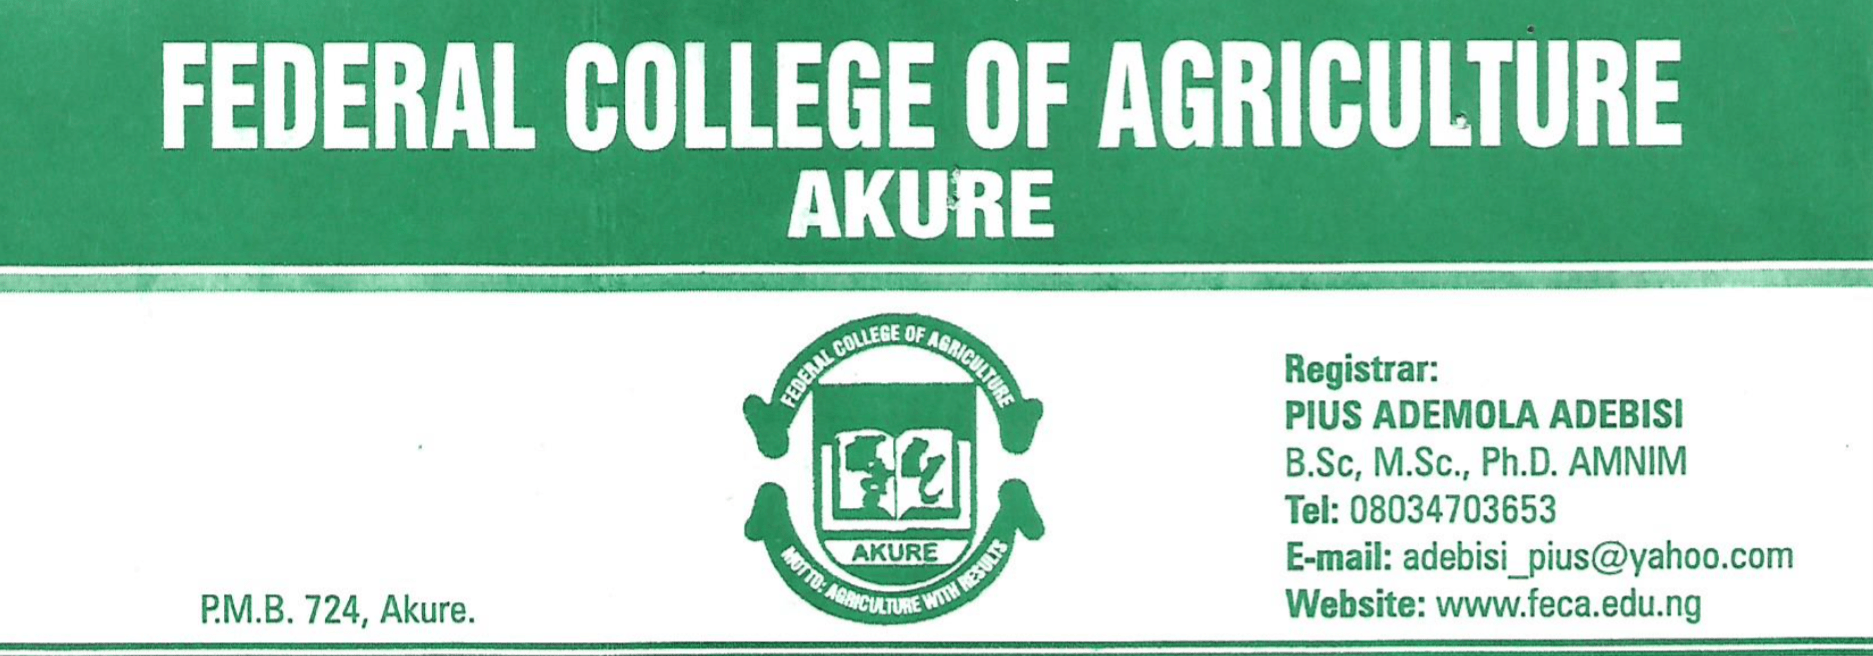 Fed. College of Agric., Akure Admission